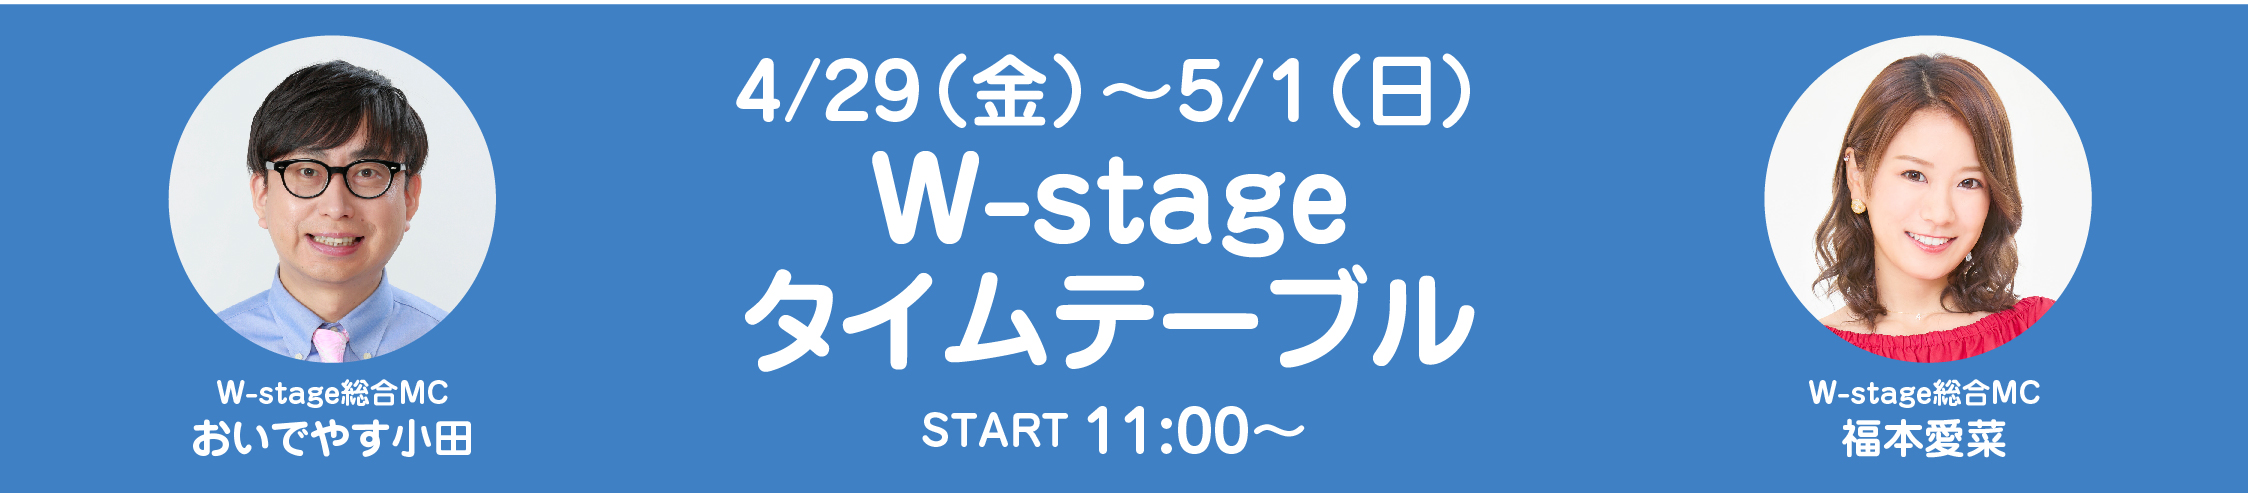 W-stageタイムテーブル